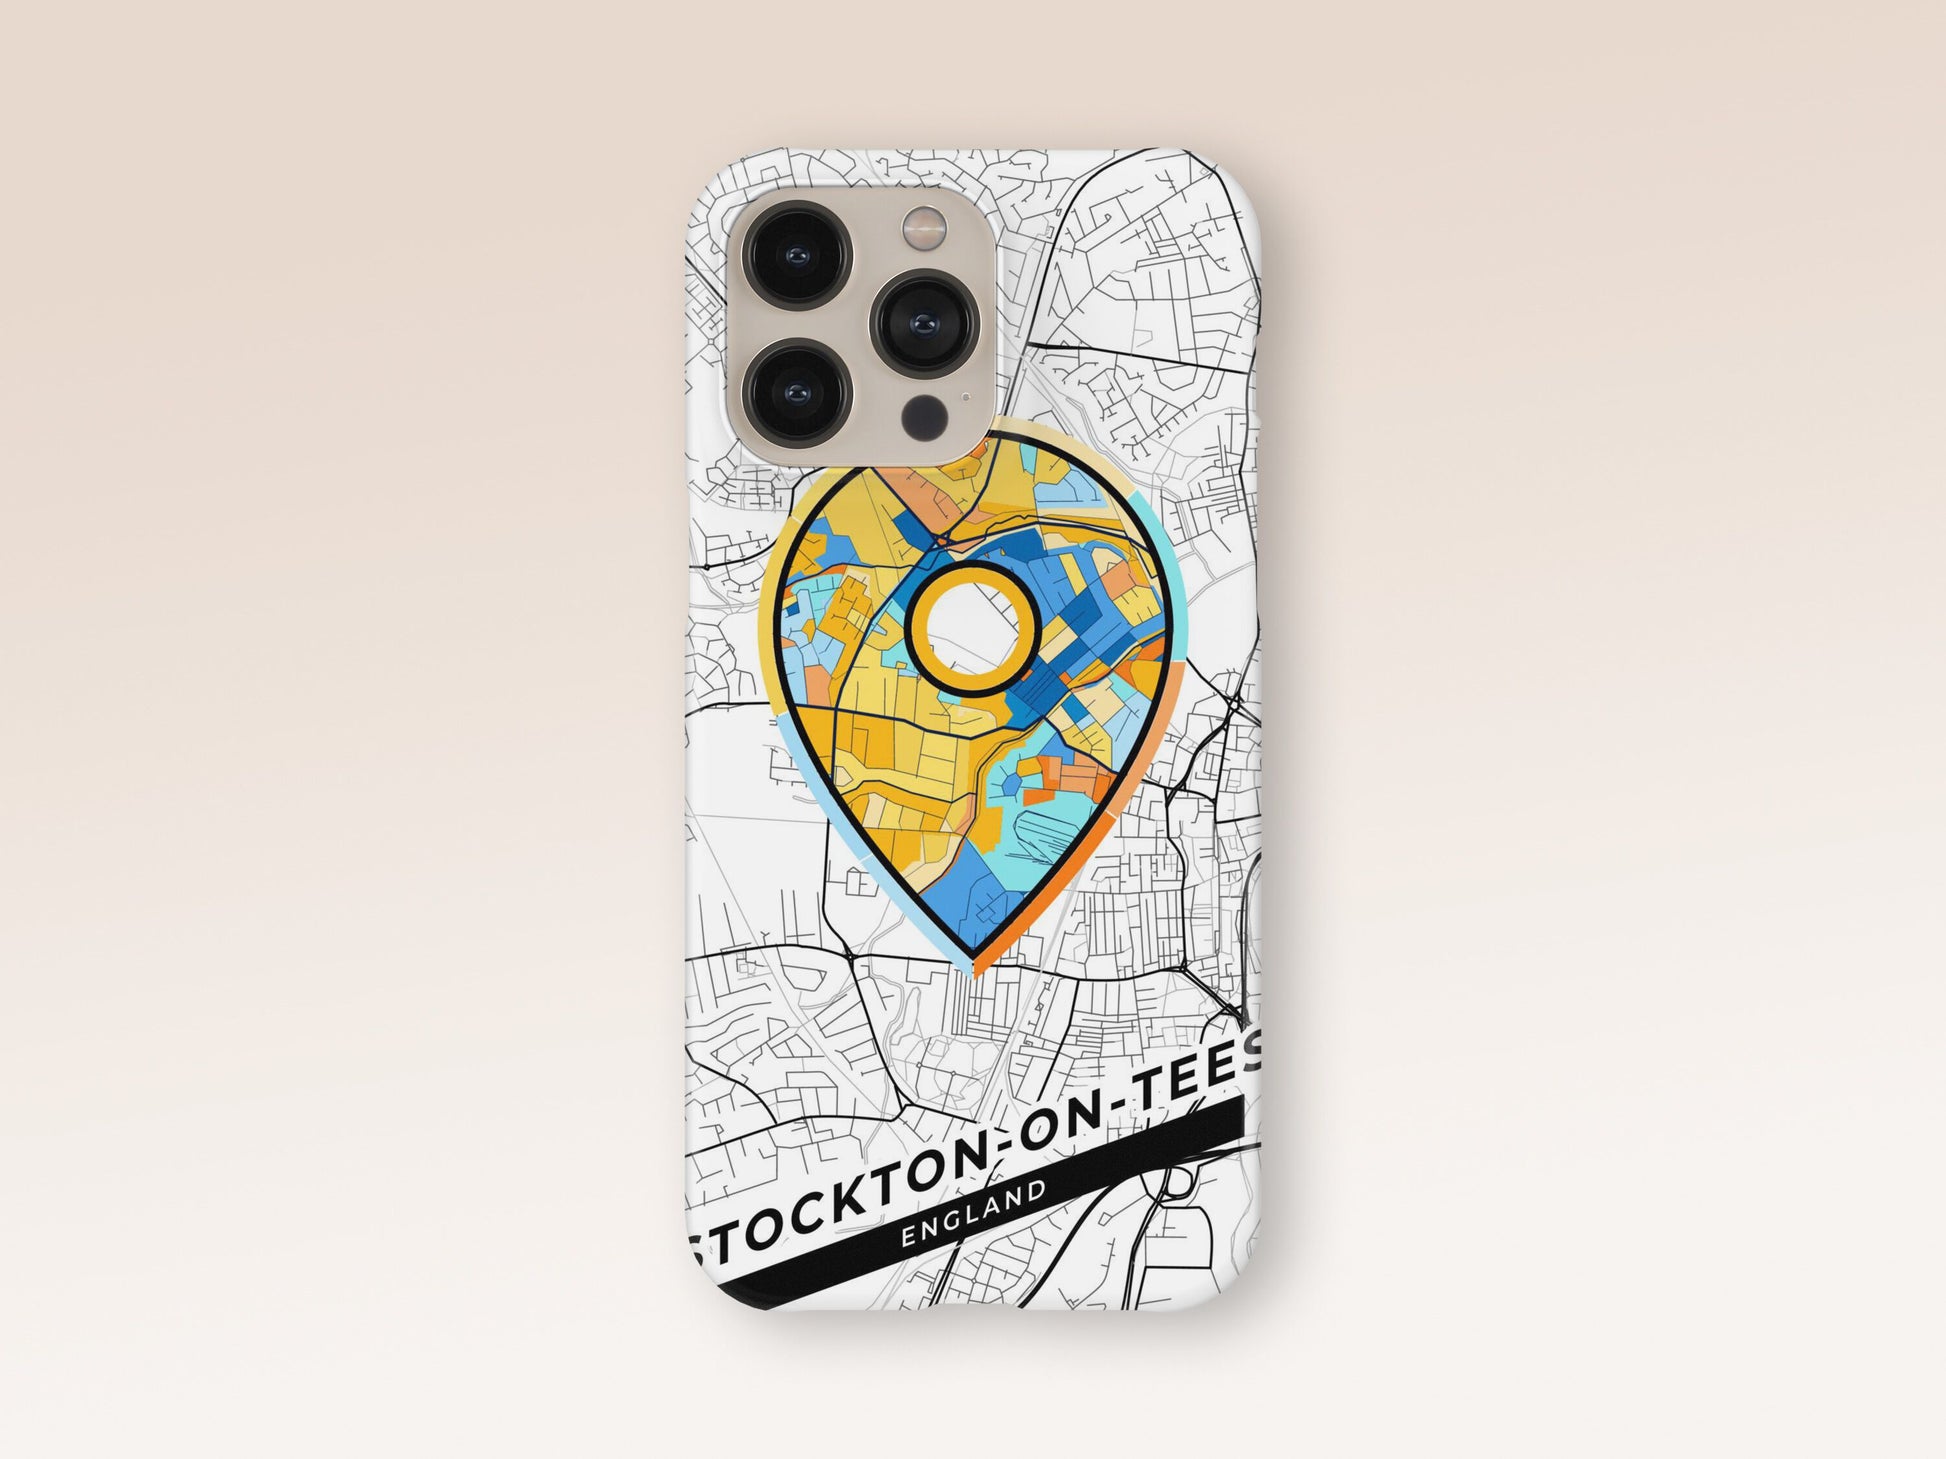 Stockton-On-Tees England slim phone case with colorful icon 1